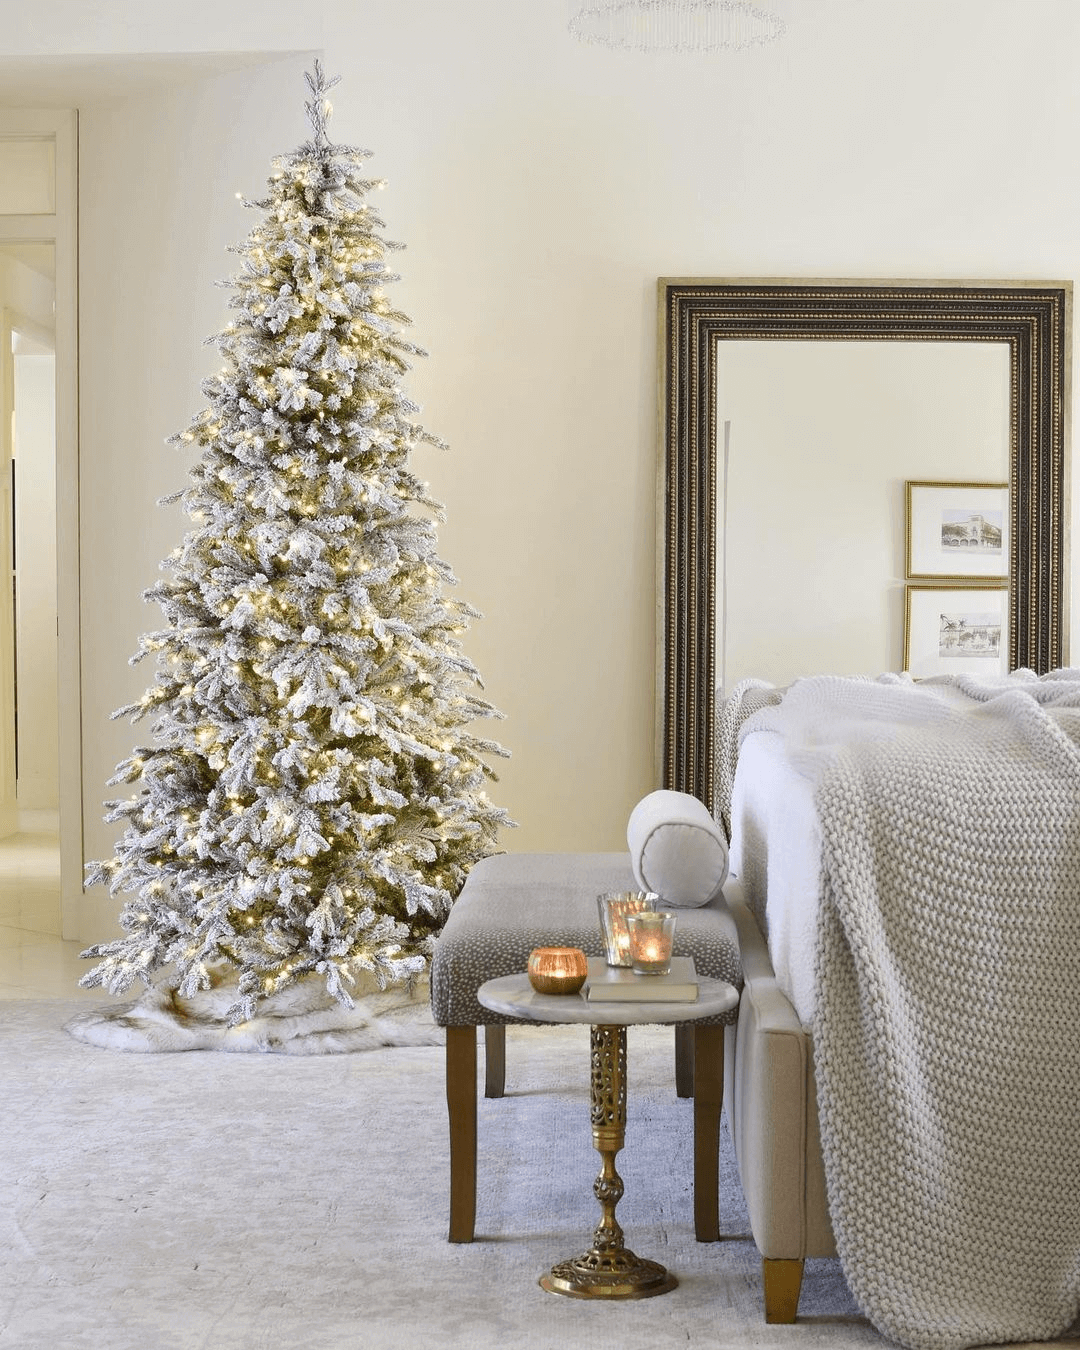 King of Christmas 8' Queen Flock® Slim Artificial Christmas Tree With 700 Warm White LED Lights